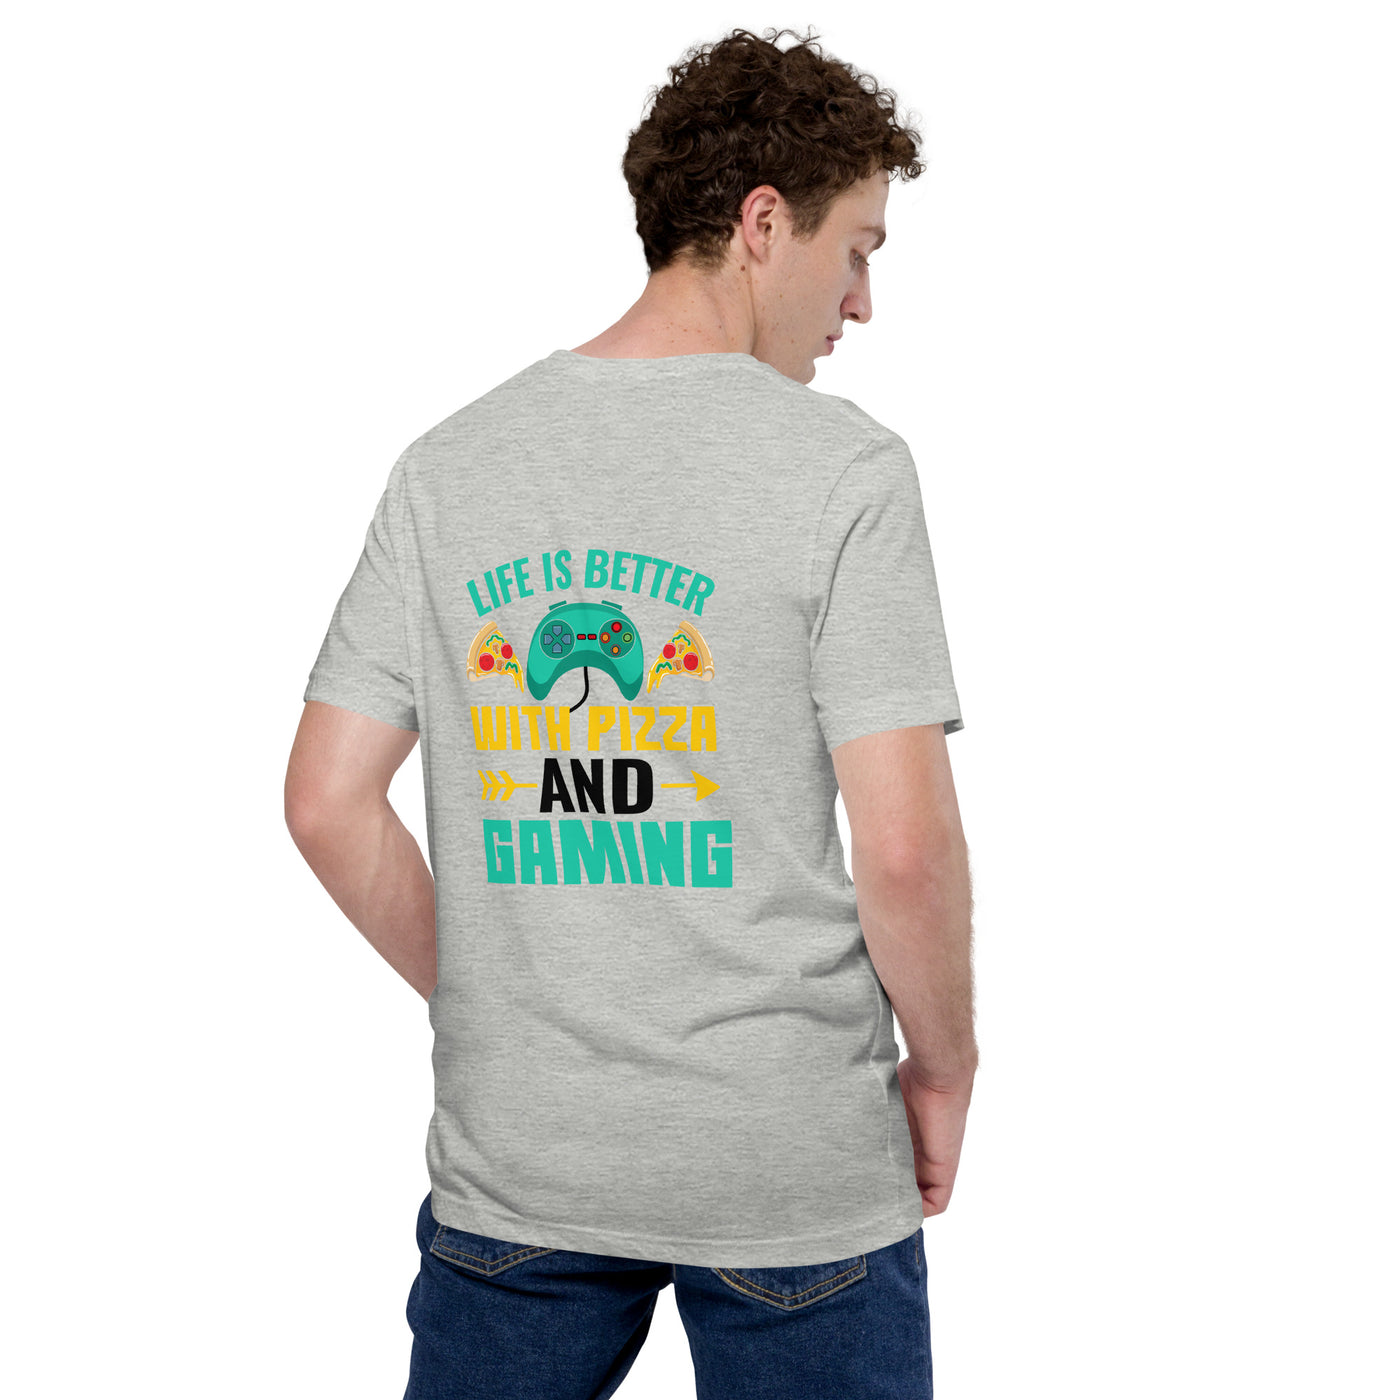 Life is Better With Pizza and Gaming Rima 14 in Dark Text -Unisex t-shirt